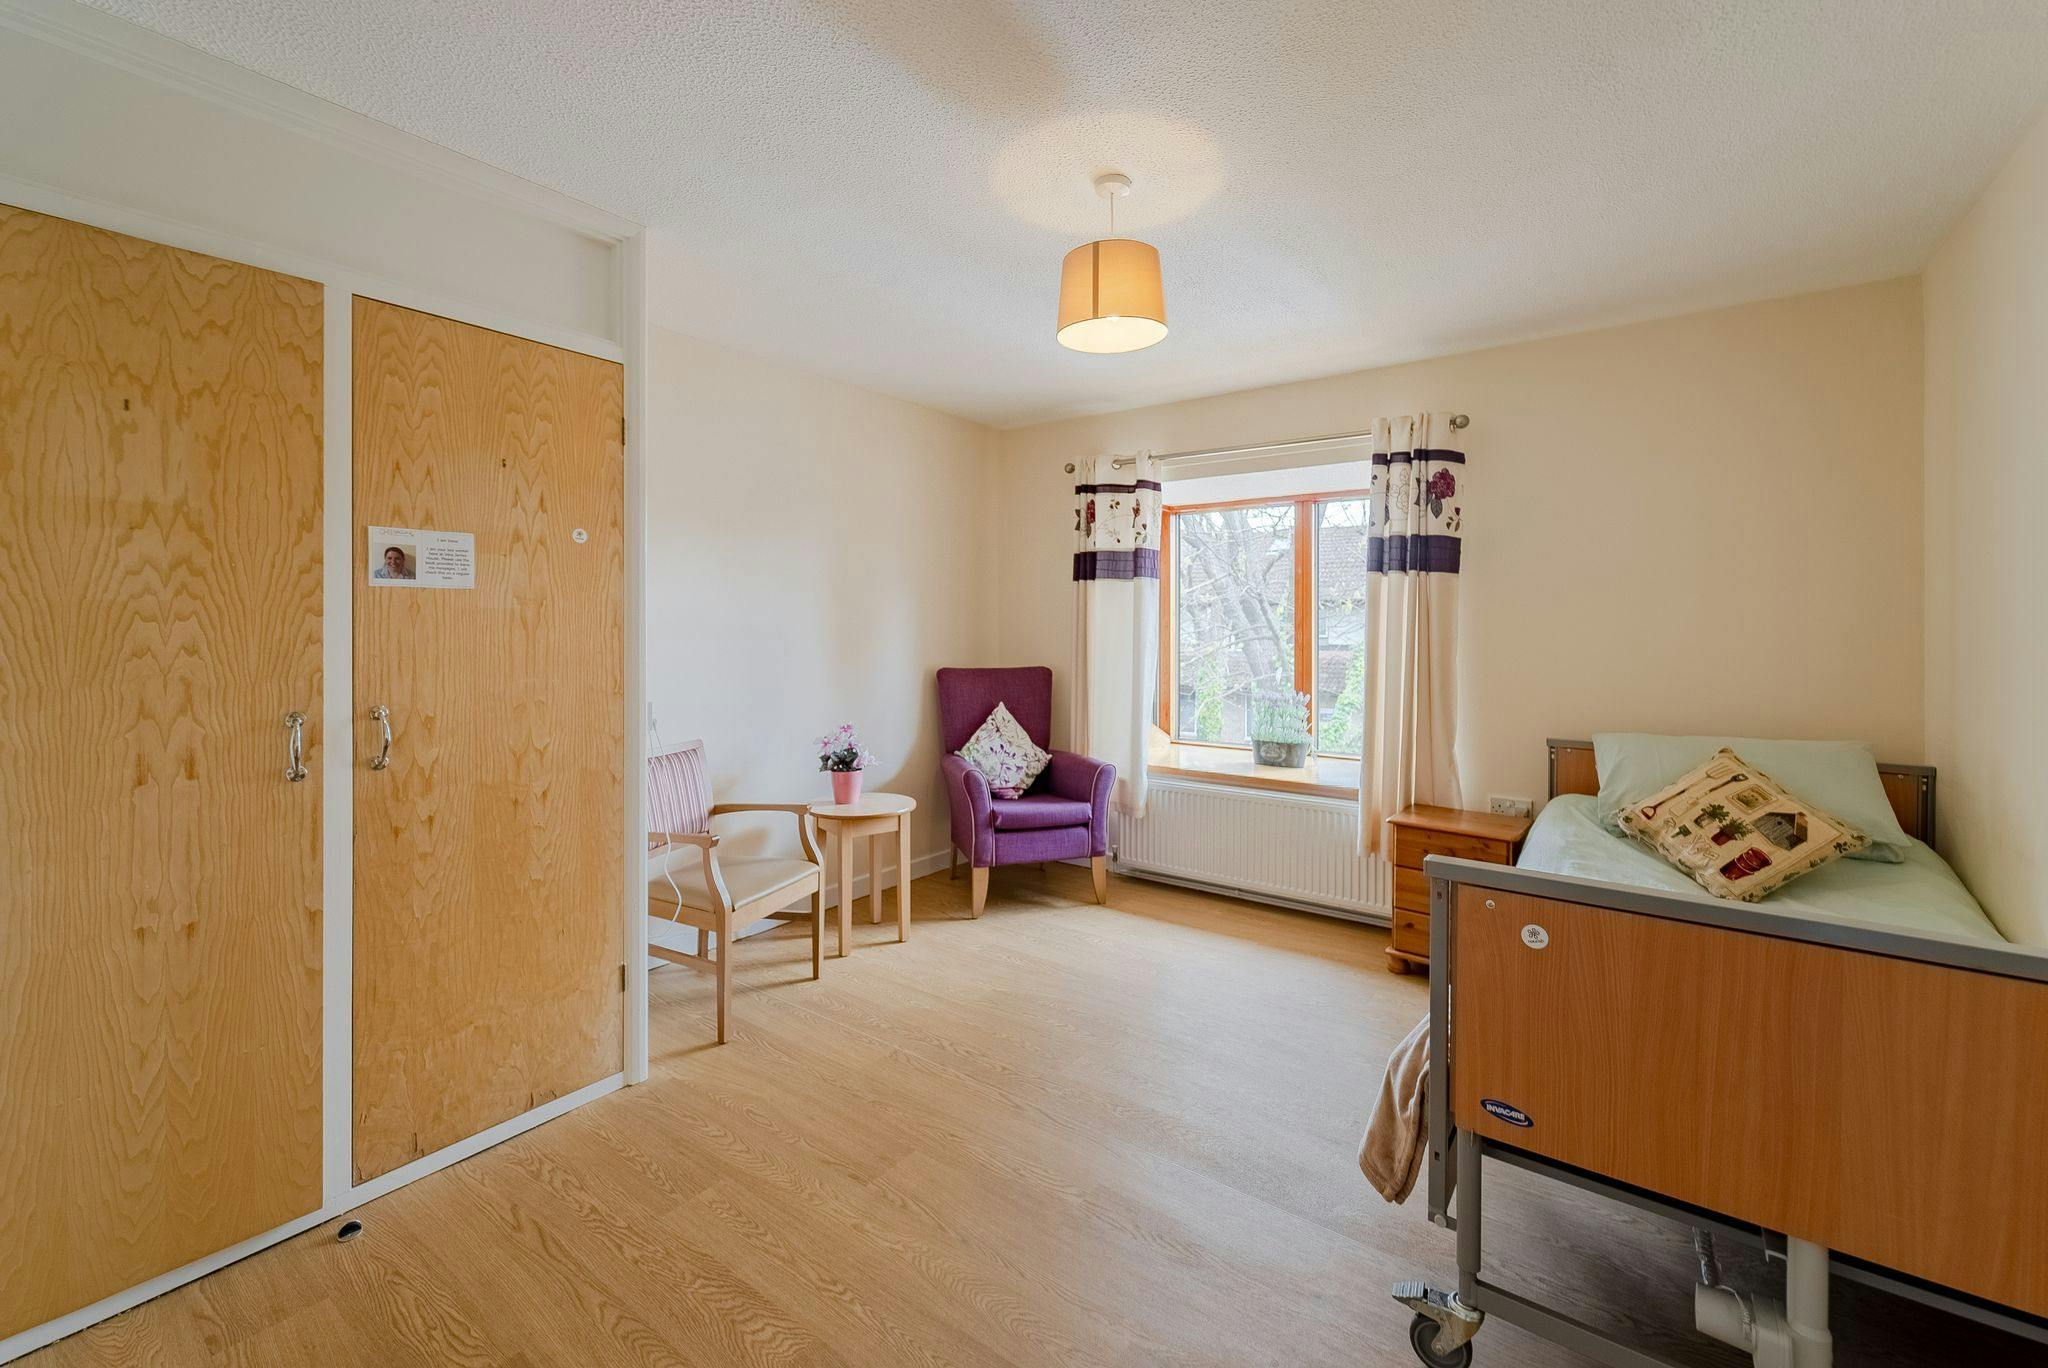 Bedroom of Vera James House care home in Ely, Cambridgeshire